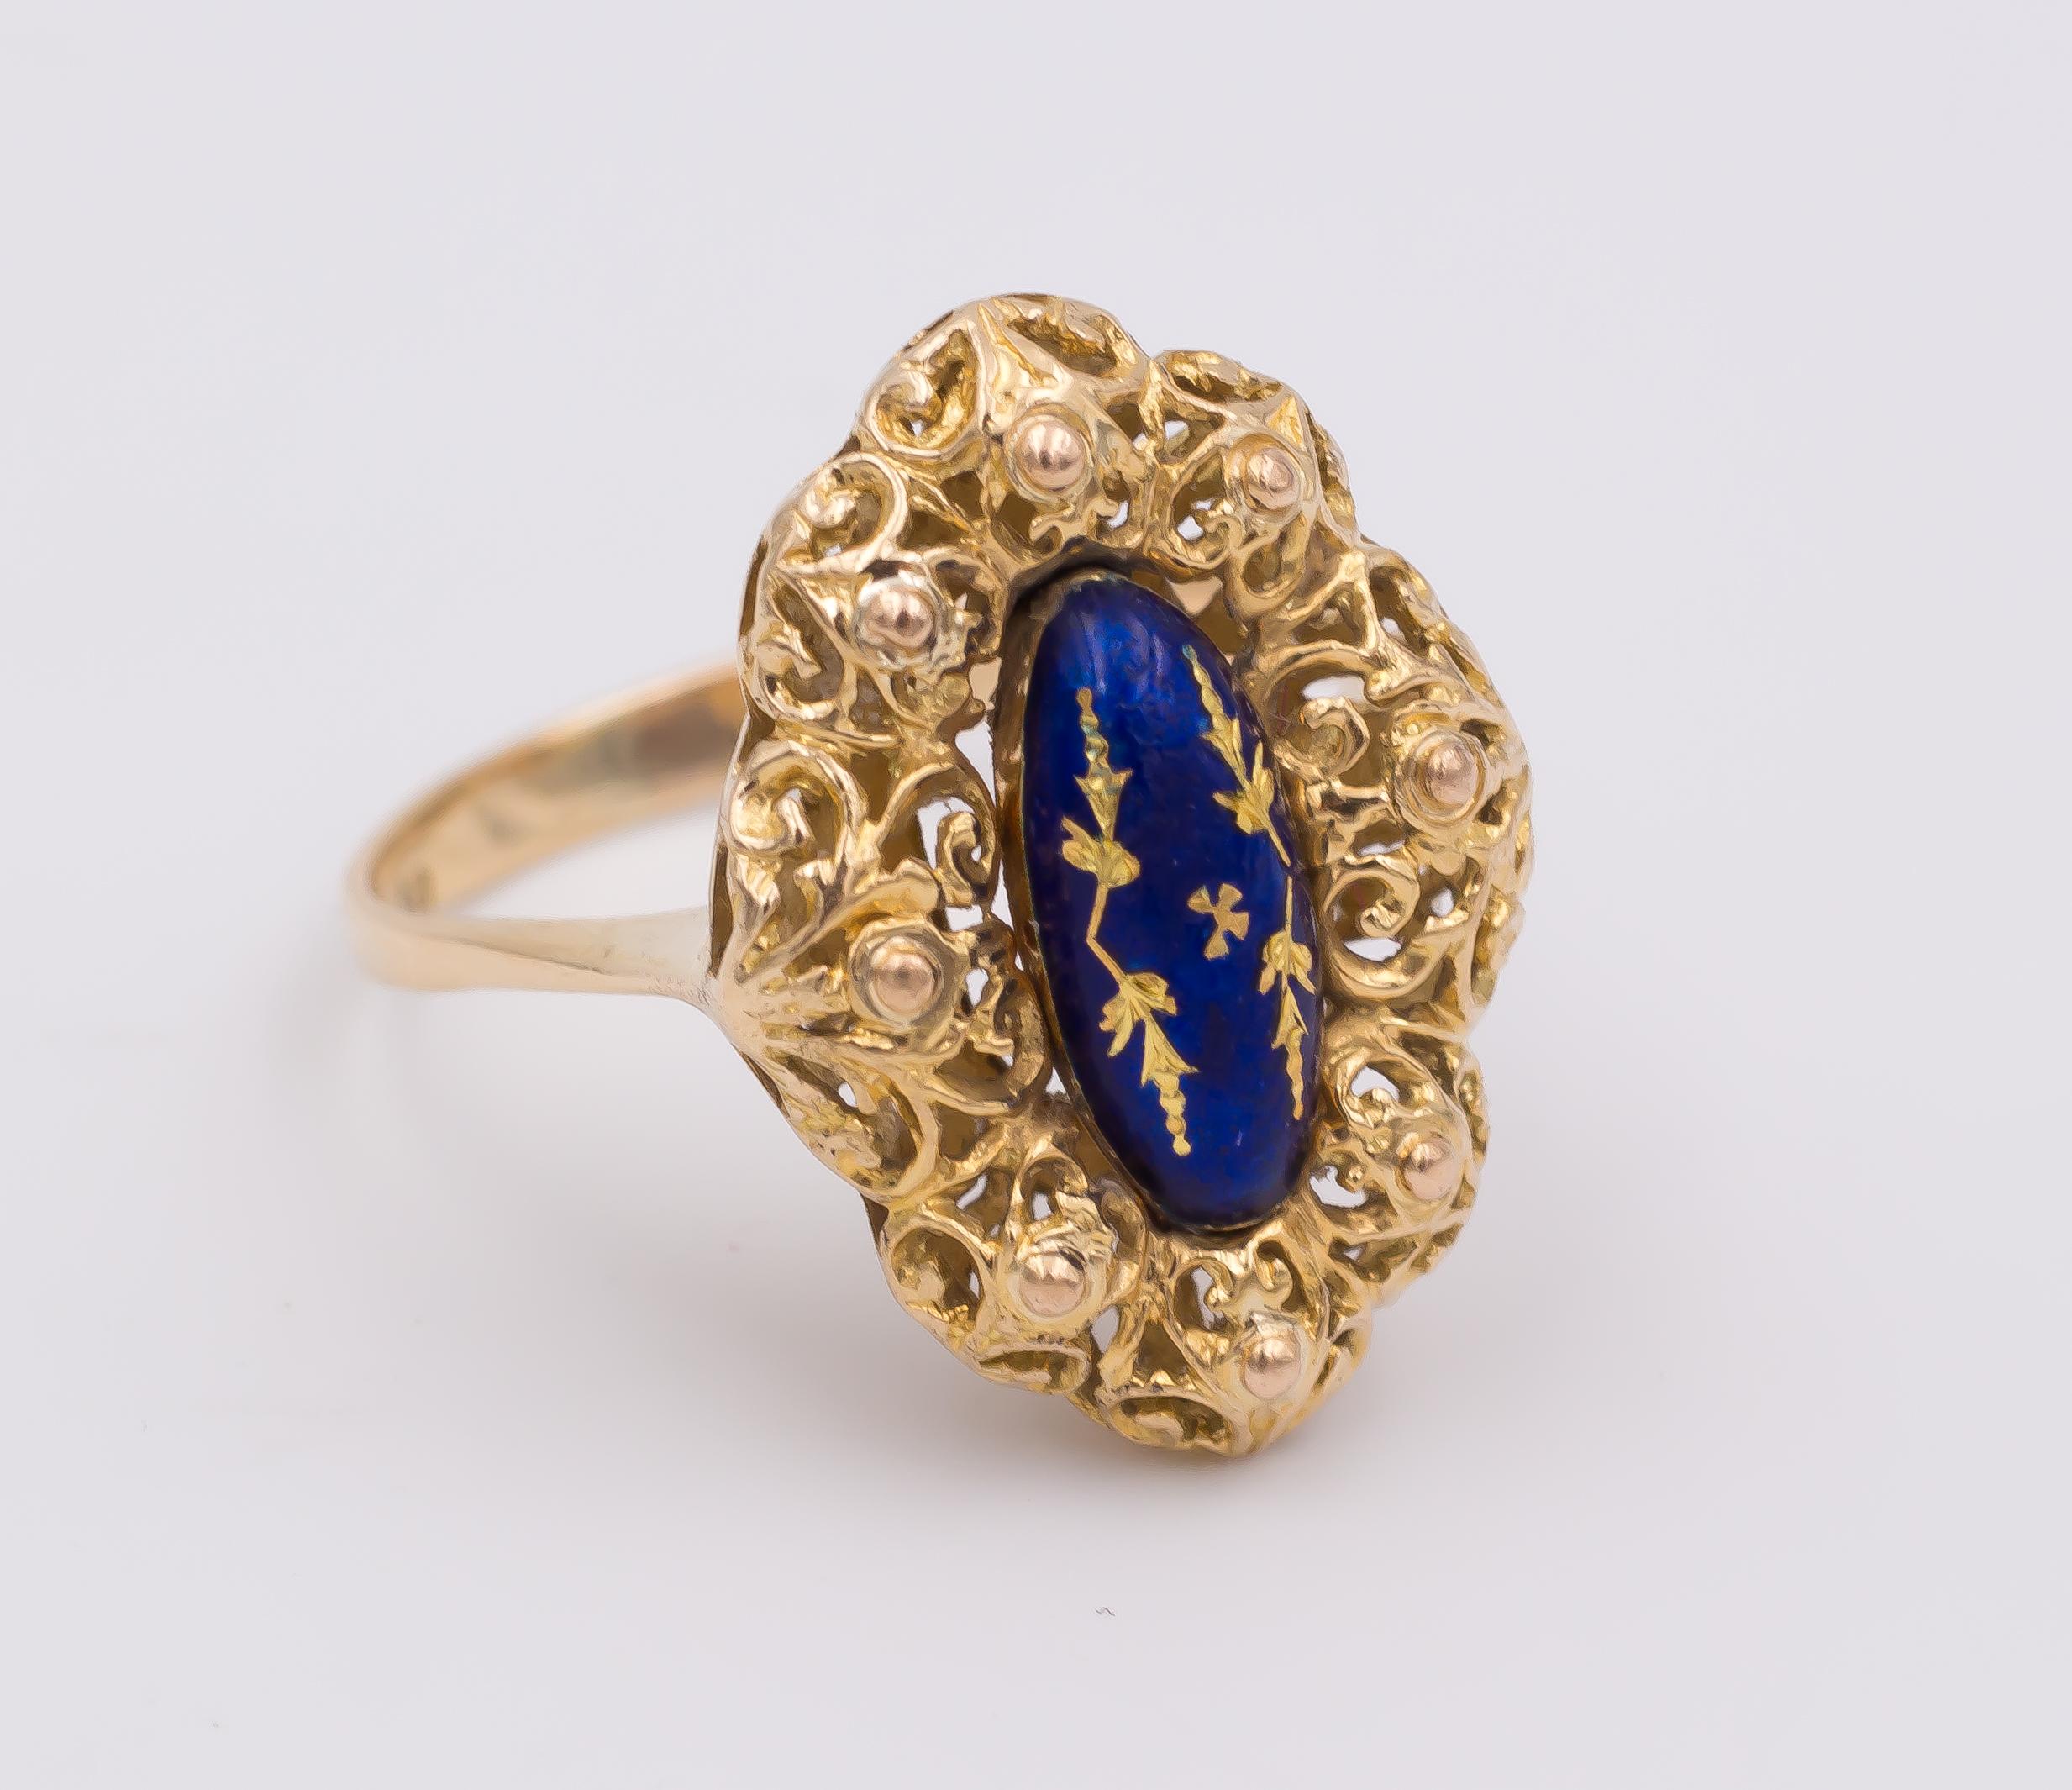 An antique ring, dating from the 1940s: it features a very interesting shape, with a full profile, where the head of the ring is set with beautiful openworks throughout; the central part of the ring is decorated with a blue enamel, that is carved to